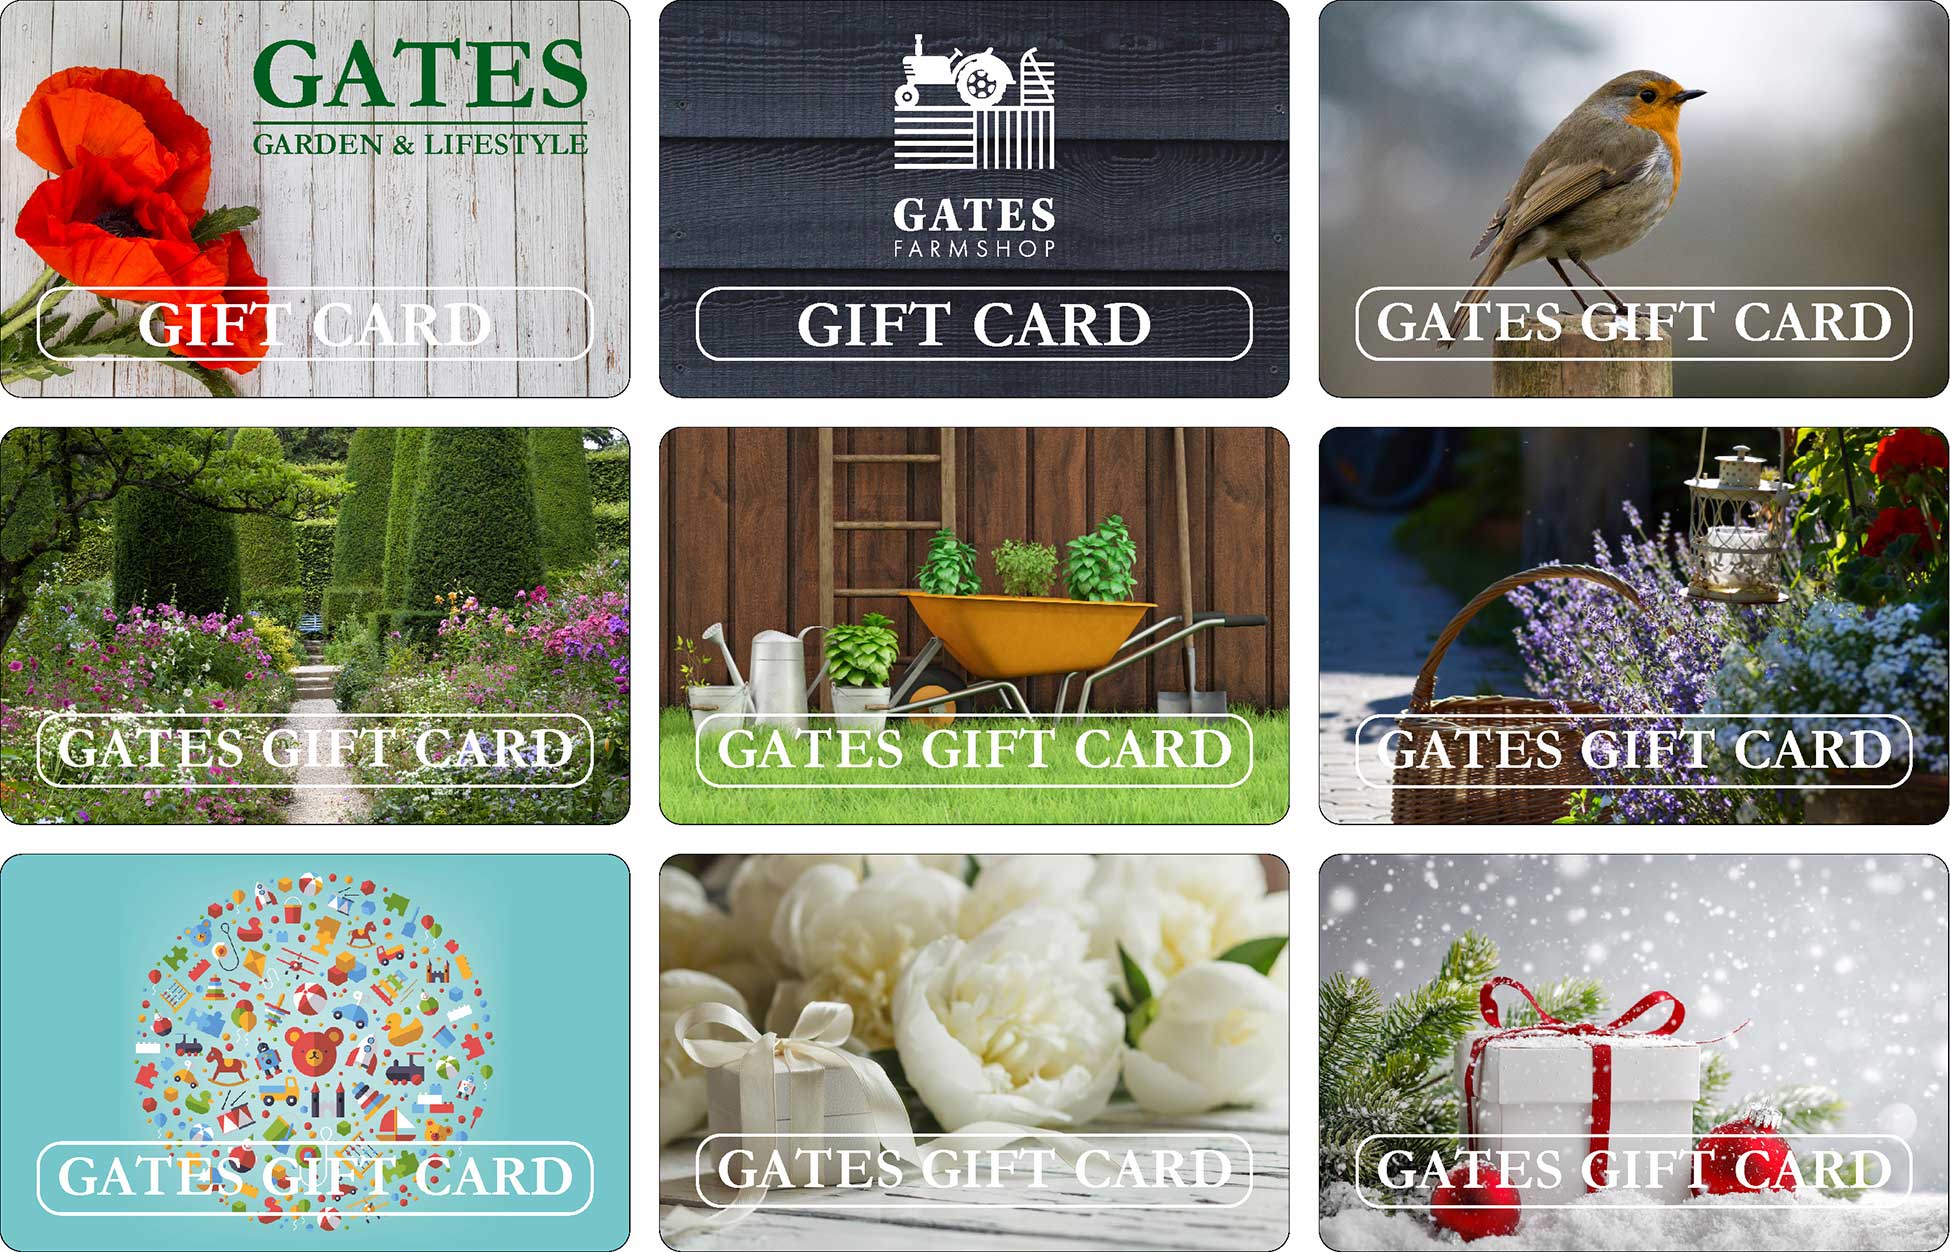 Gates Gift Cards For Sale